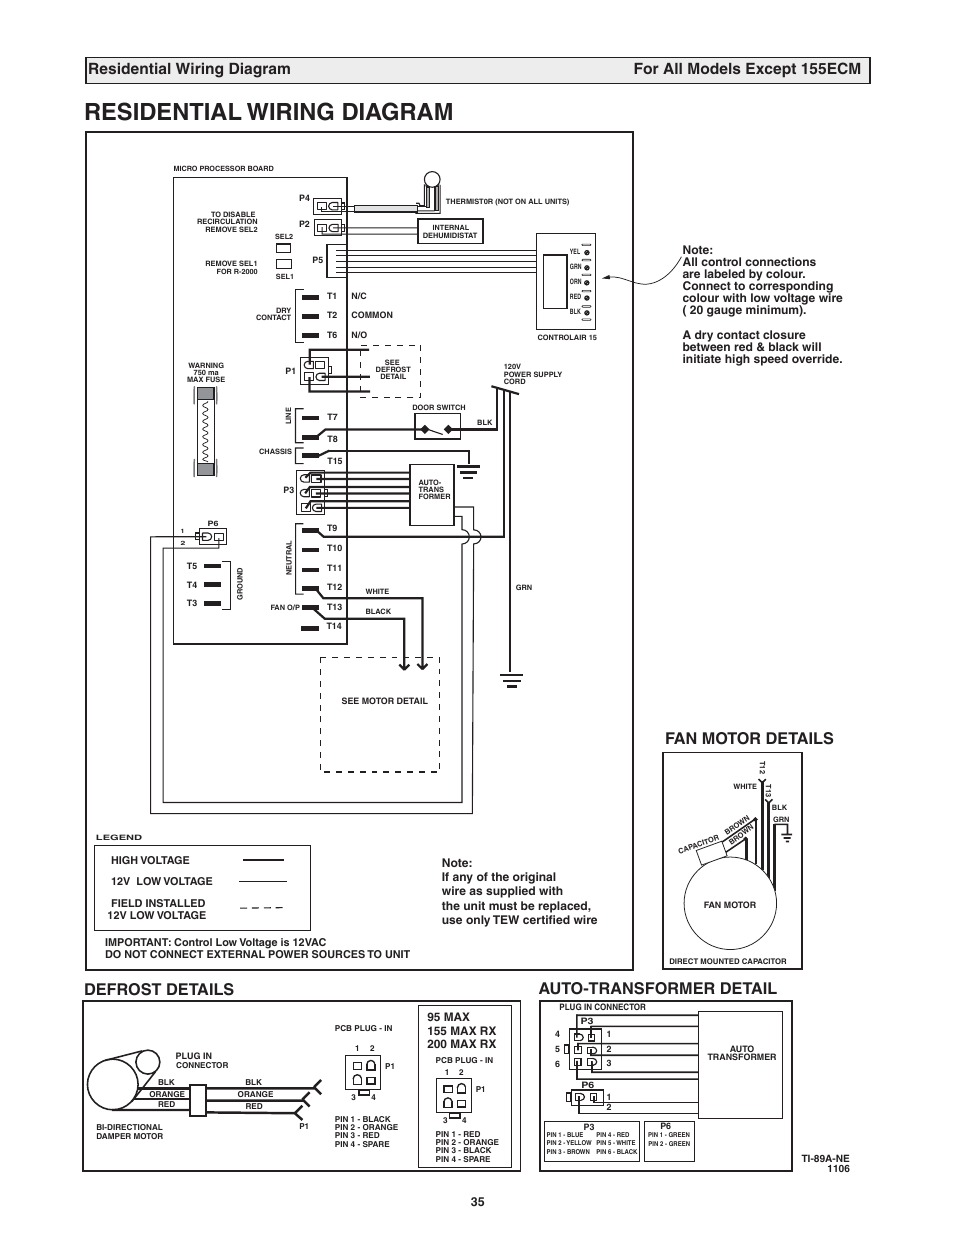 Residential wiring diagram, Fan motor details, Auto-transformer detail | Defrost details | Lifebreath MAXTOP User Manual | Page 35 / 36